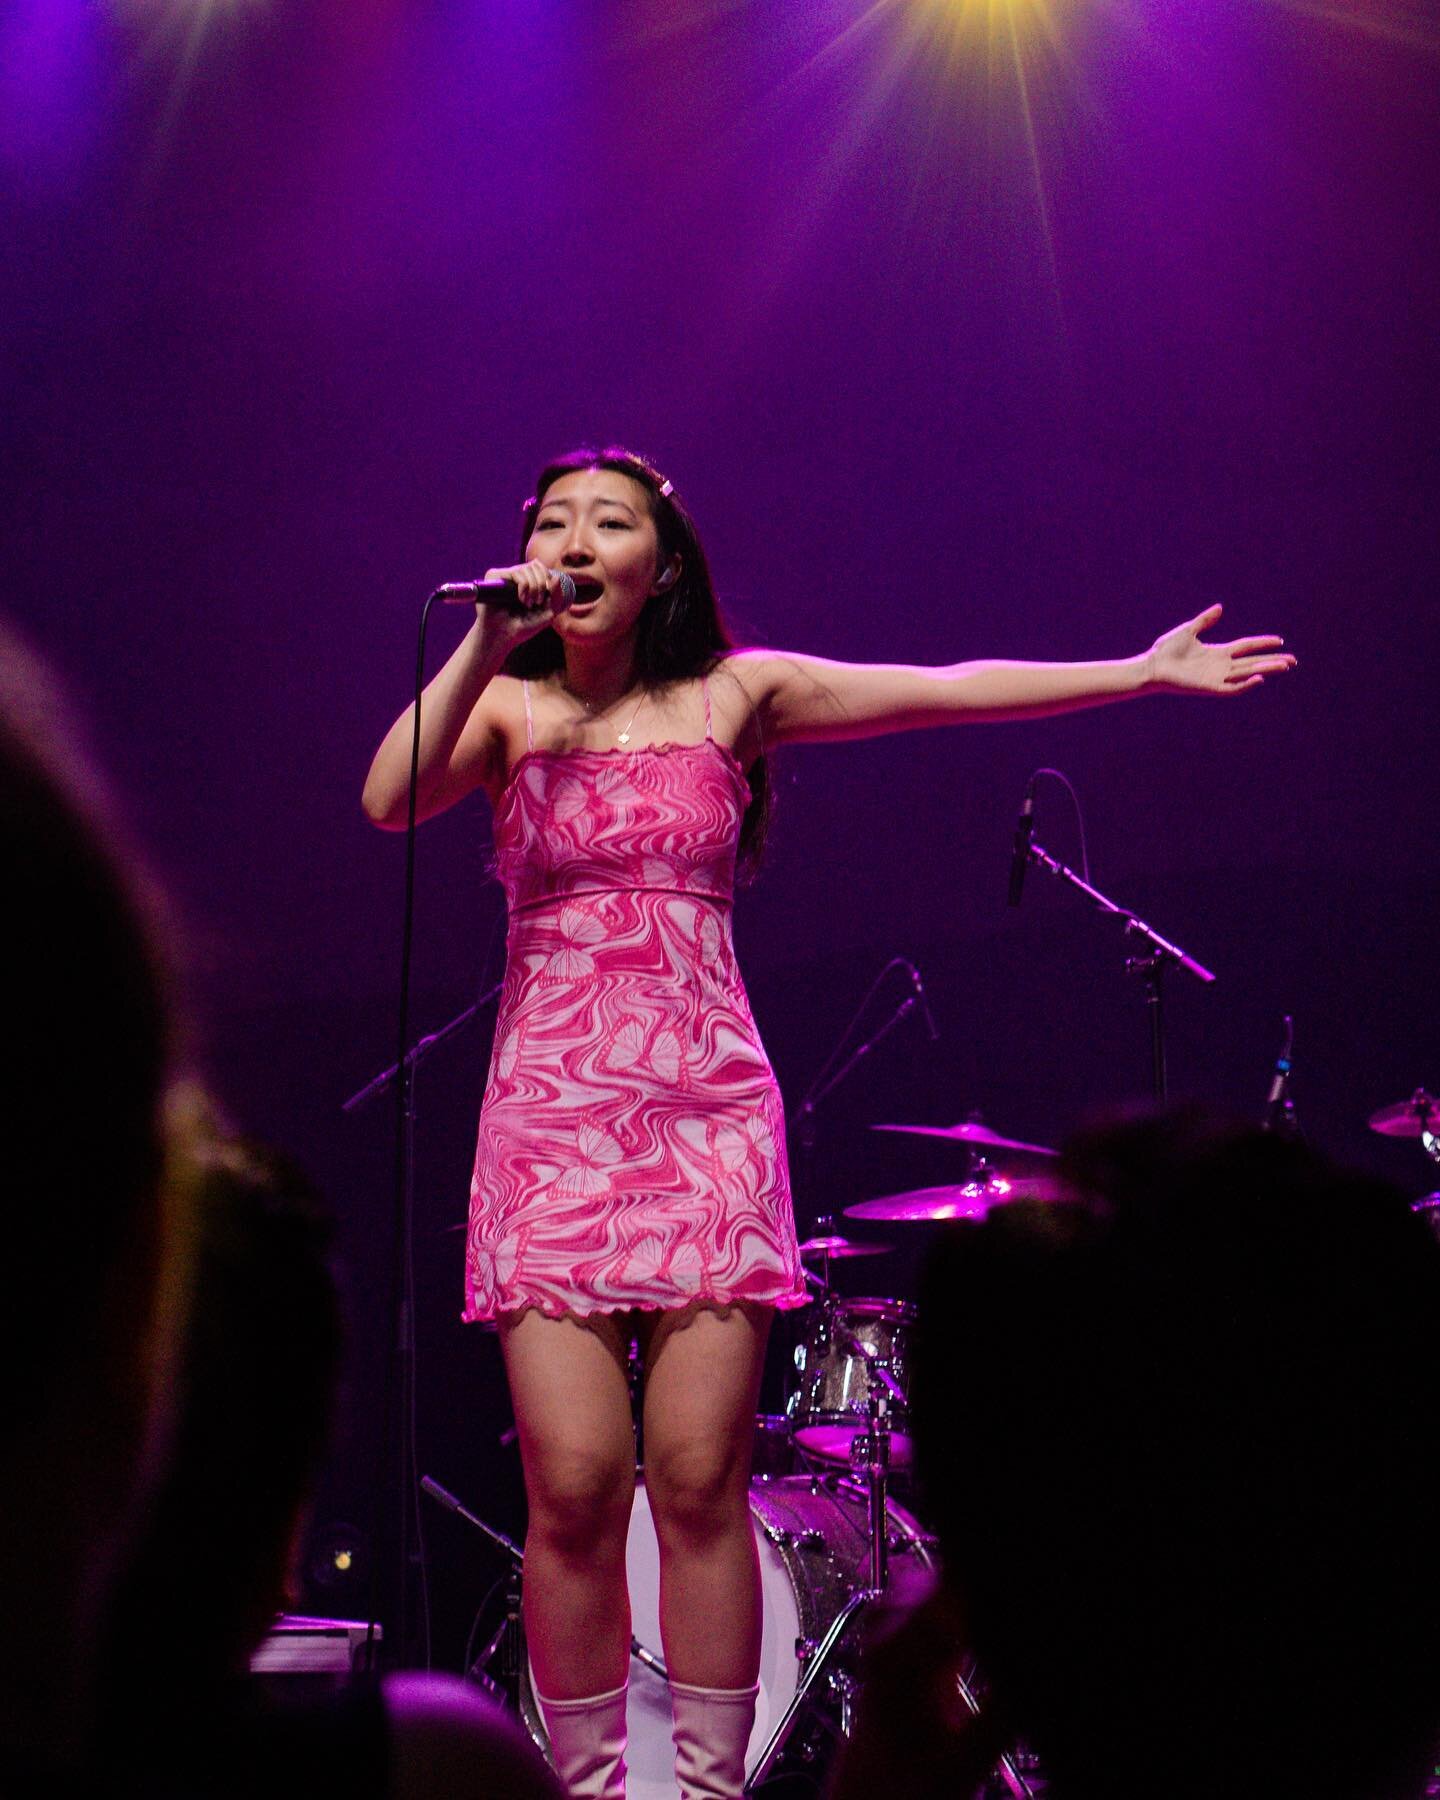 In loving memory of our late staff photographer, T&rsquo;Shauna Henry, these are her photos of Katherine Li opening for Hayley Kiyoko on the Panorama Tour at Buckhead Theatre on April 28, 2023, the last show she photographed with us. This is the fina